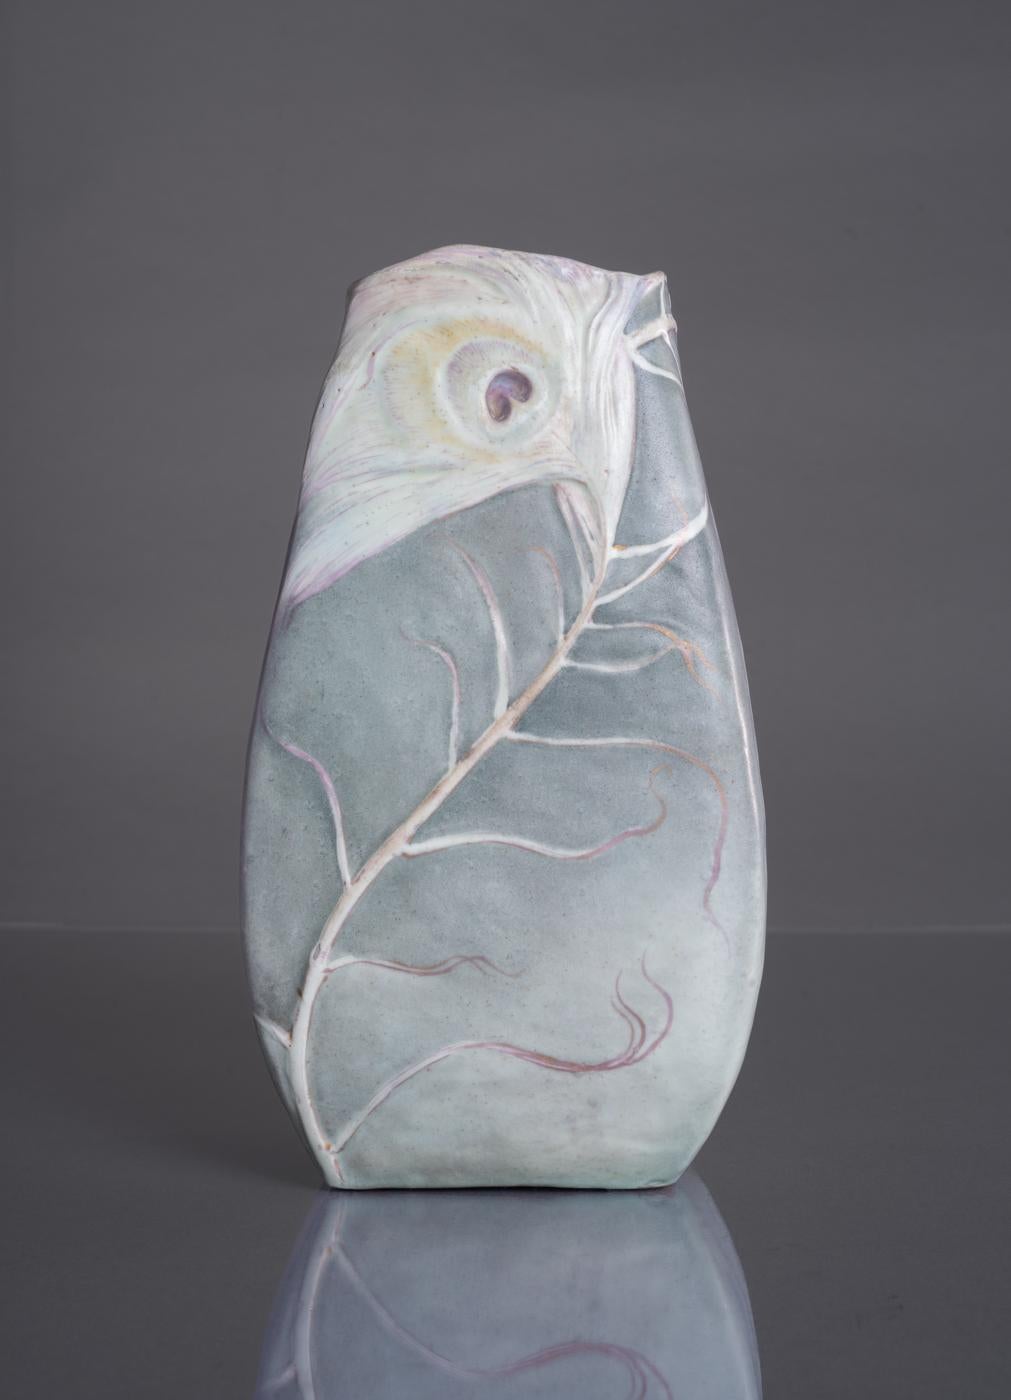 A pair of exceptional earthenware vases by Clément Massier in a unique rectangular form, featuring albino peacock feathers enhanced by accents of purple and gold glazing. As Massier is most closely associated with richly-colored, iridescent glazes,